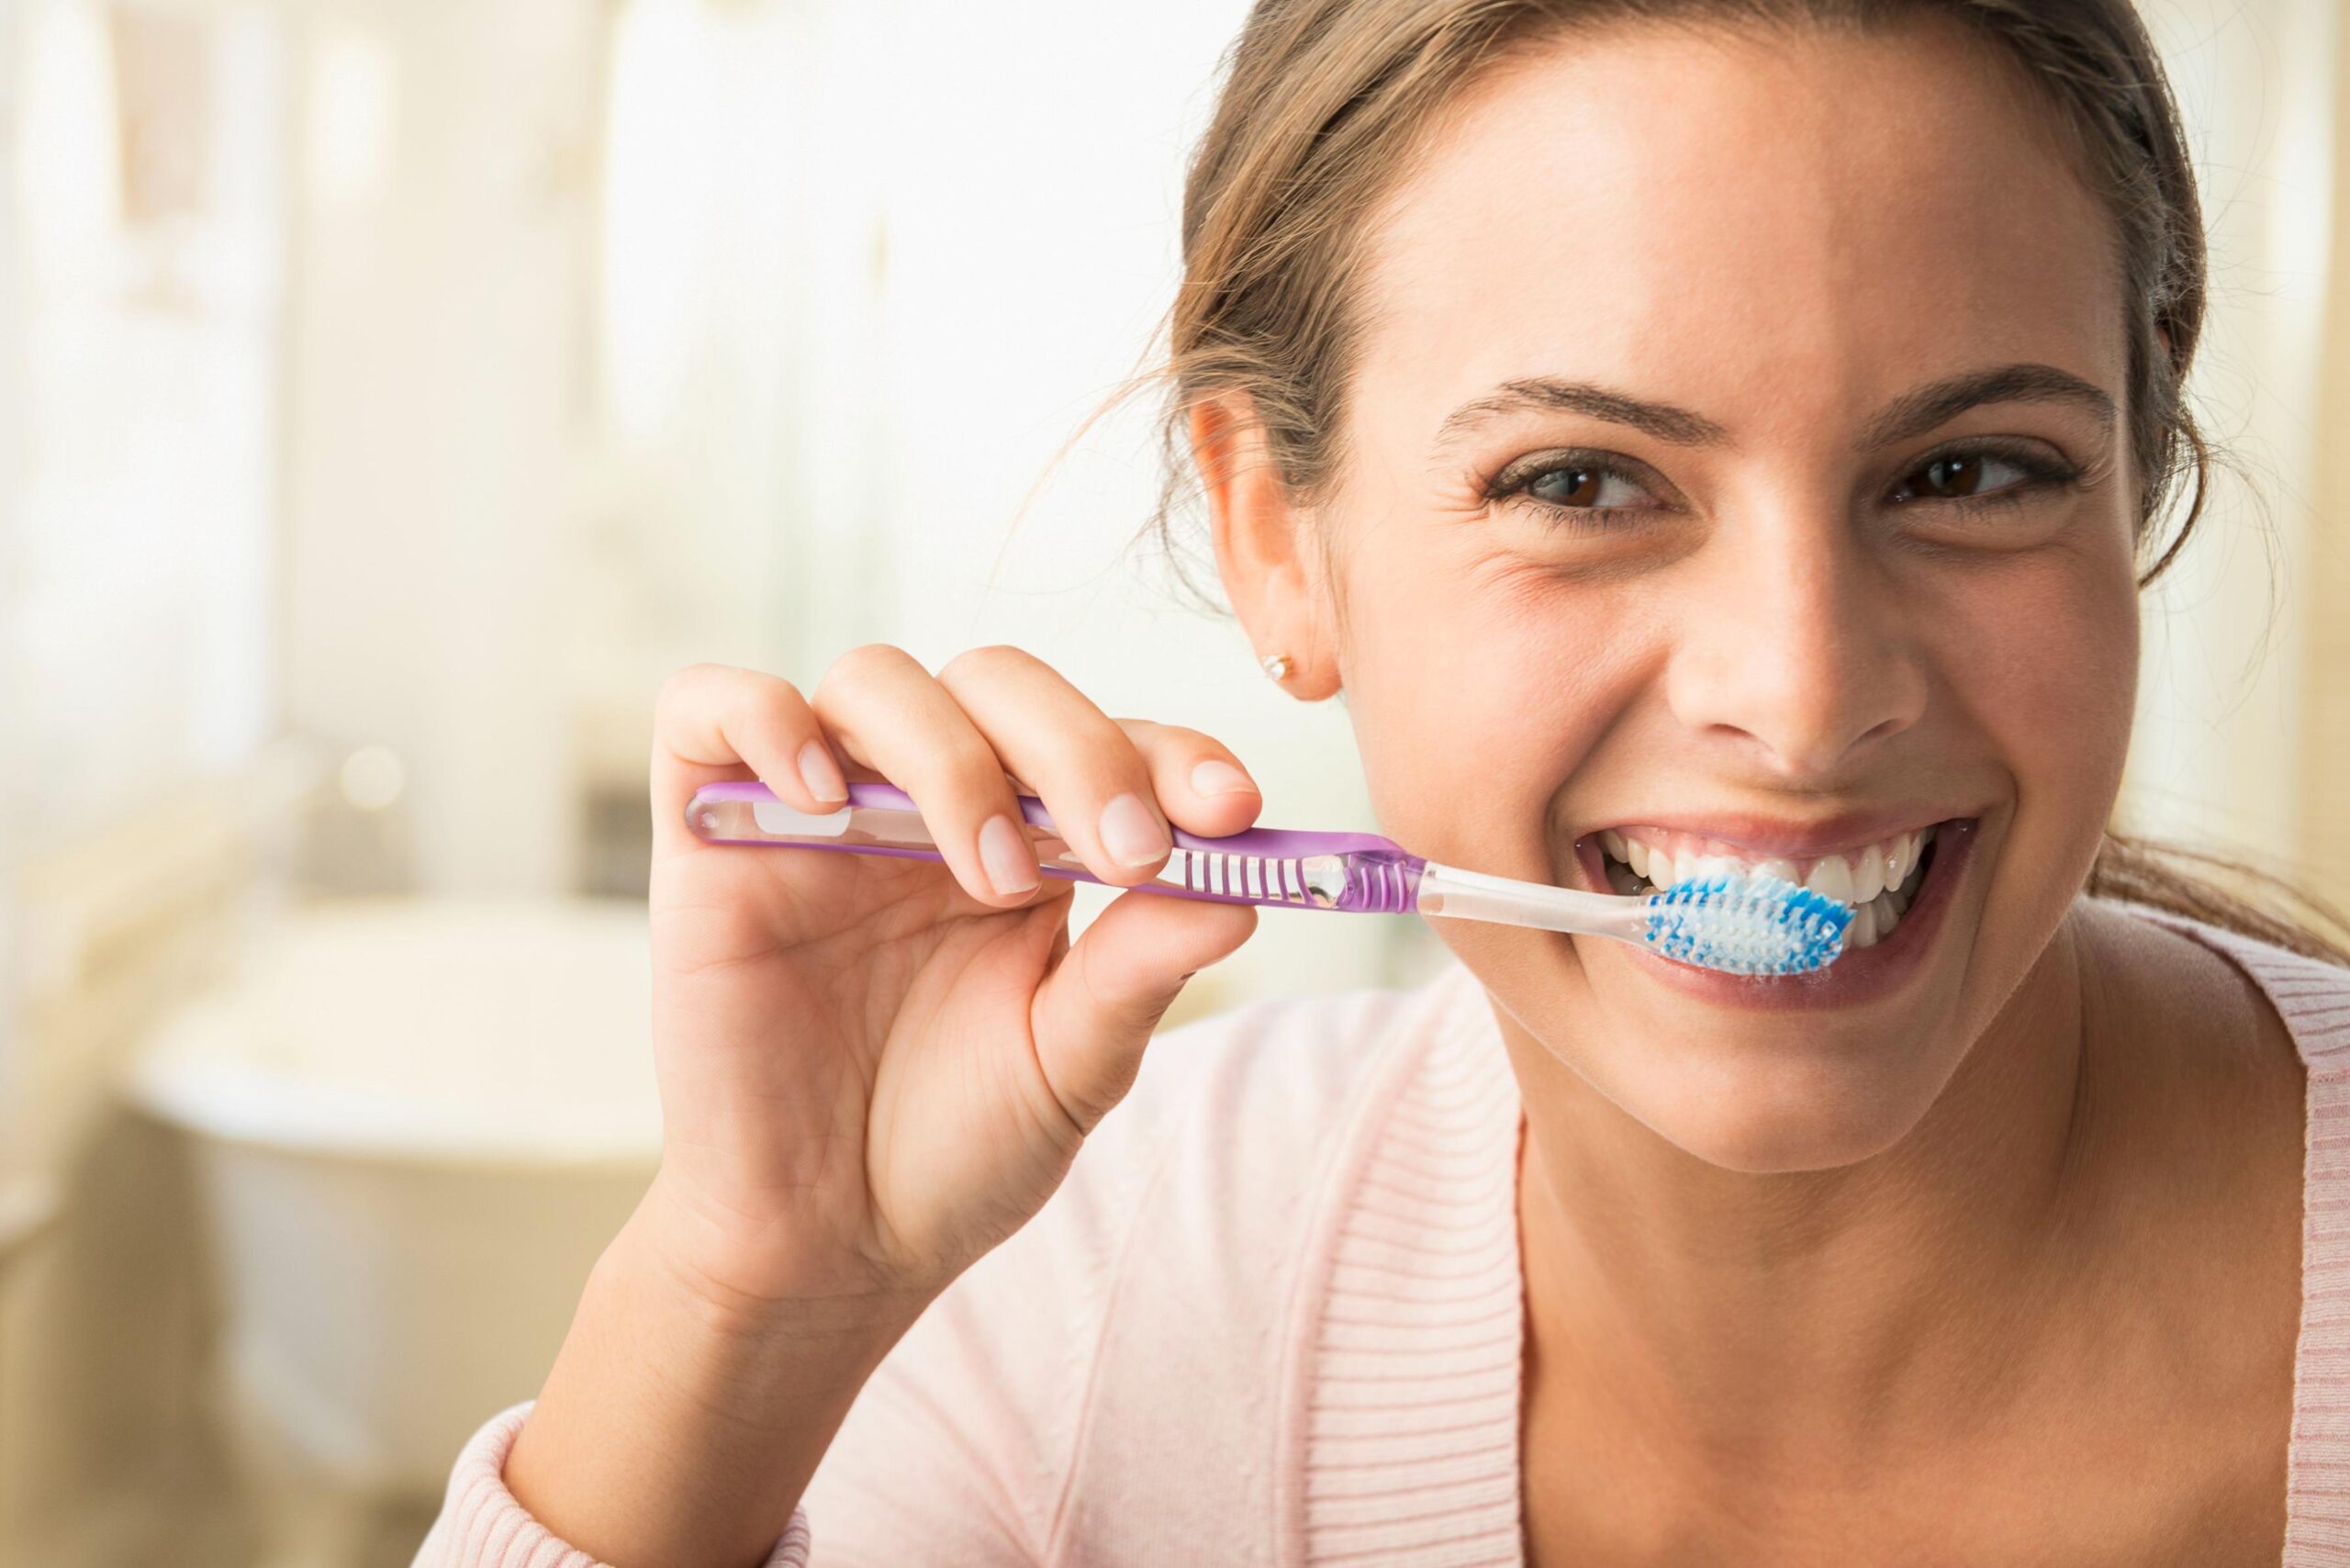 Whitening Toothpaste Bad for Your Teeth?